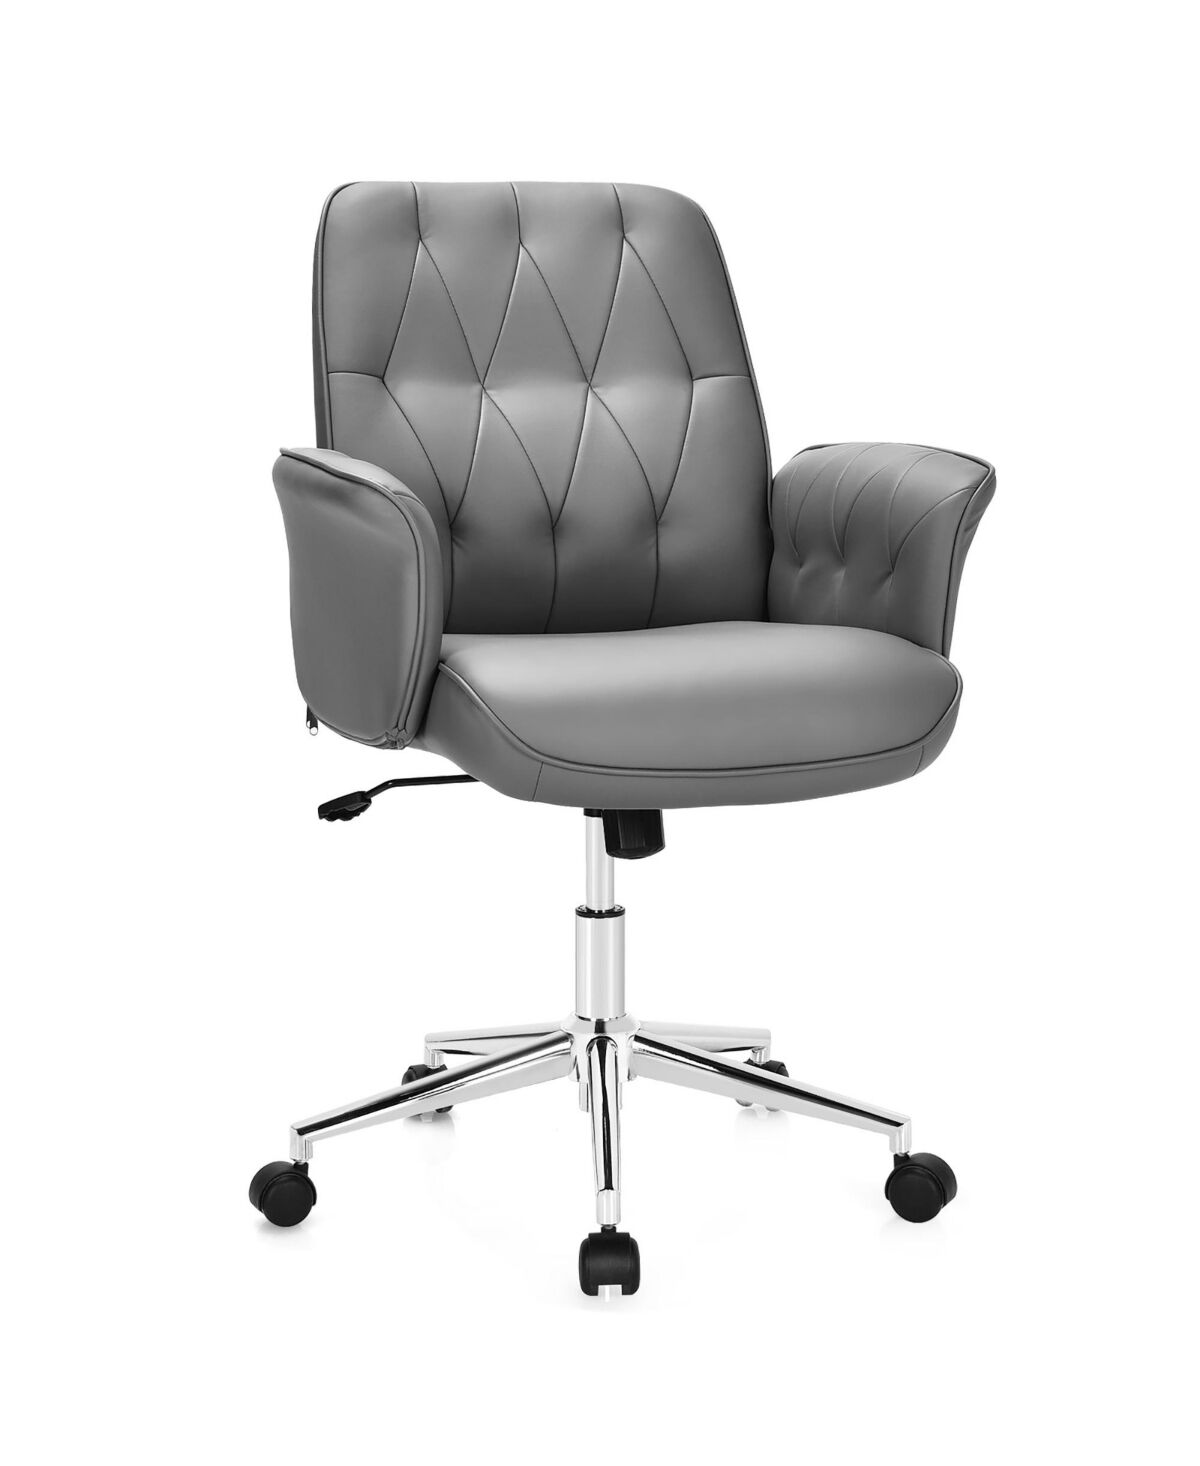 Costway Modern Home Office Leisure Chair Pu Leather Adjustable Swivel - Grey